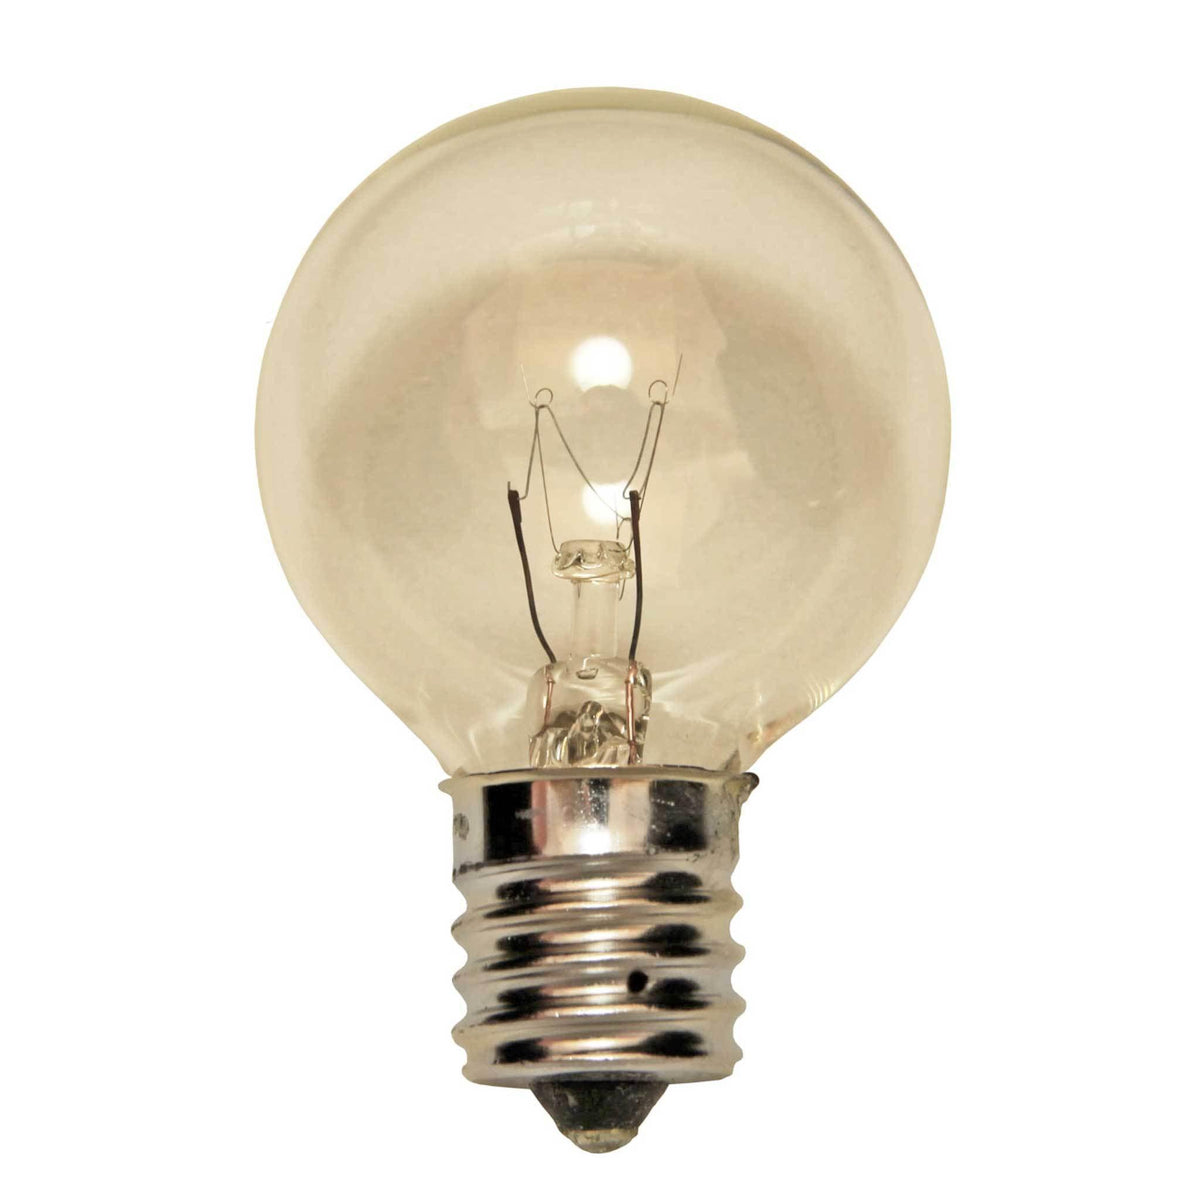 1 Box of 25 of brand new transparent Clear G40 Globe Light Bulbs Replace your old bulbs today from leedisplay.com